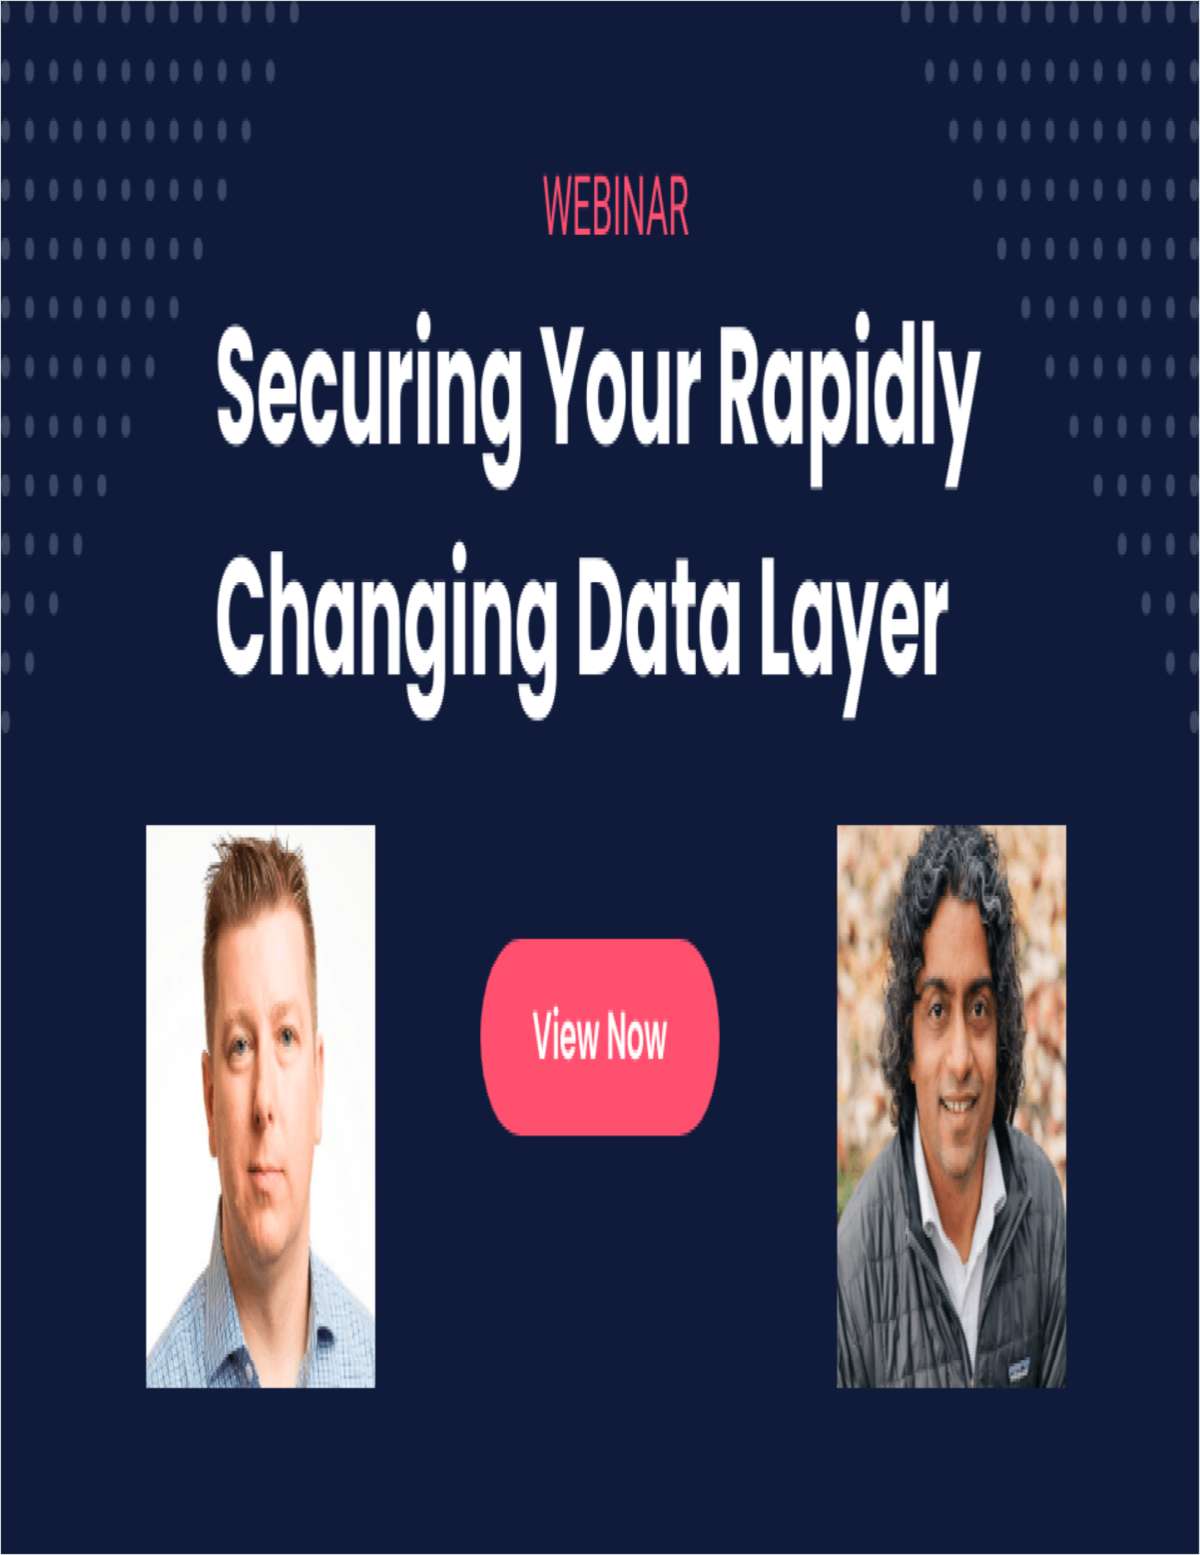 Securing Your Rapidly Changing Data Layer